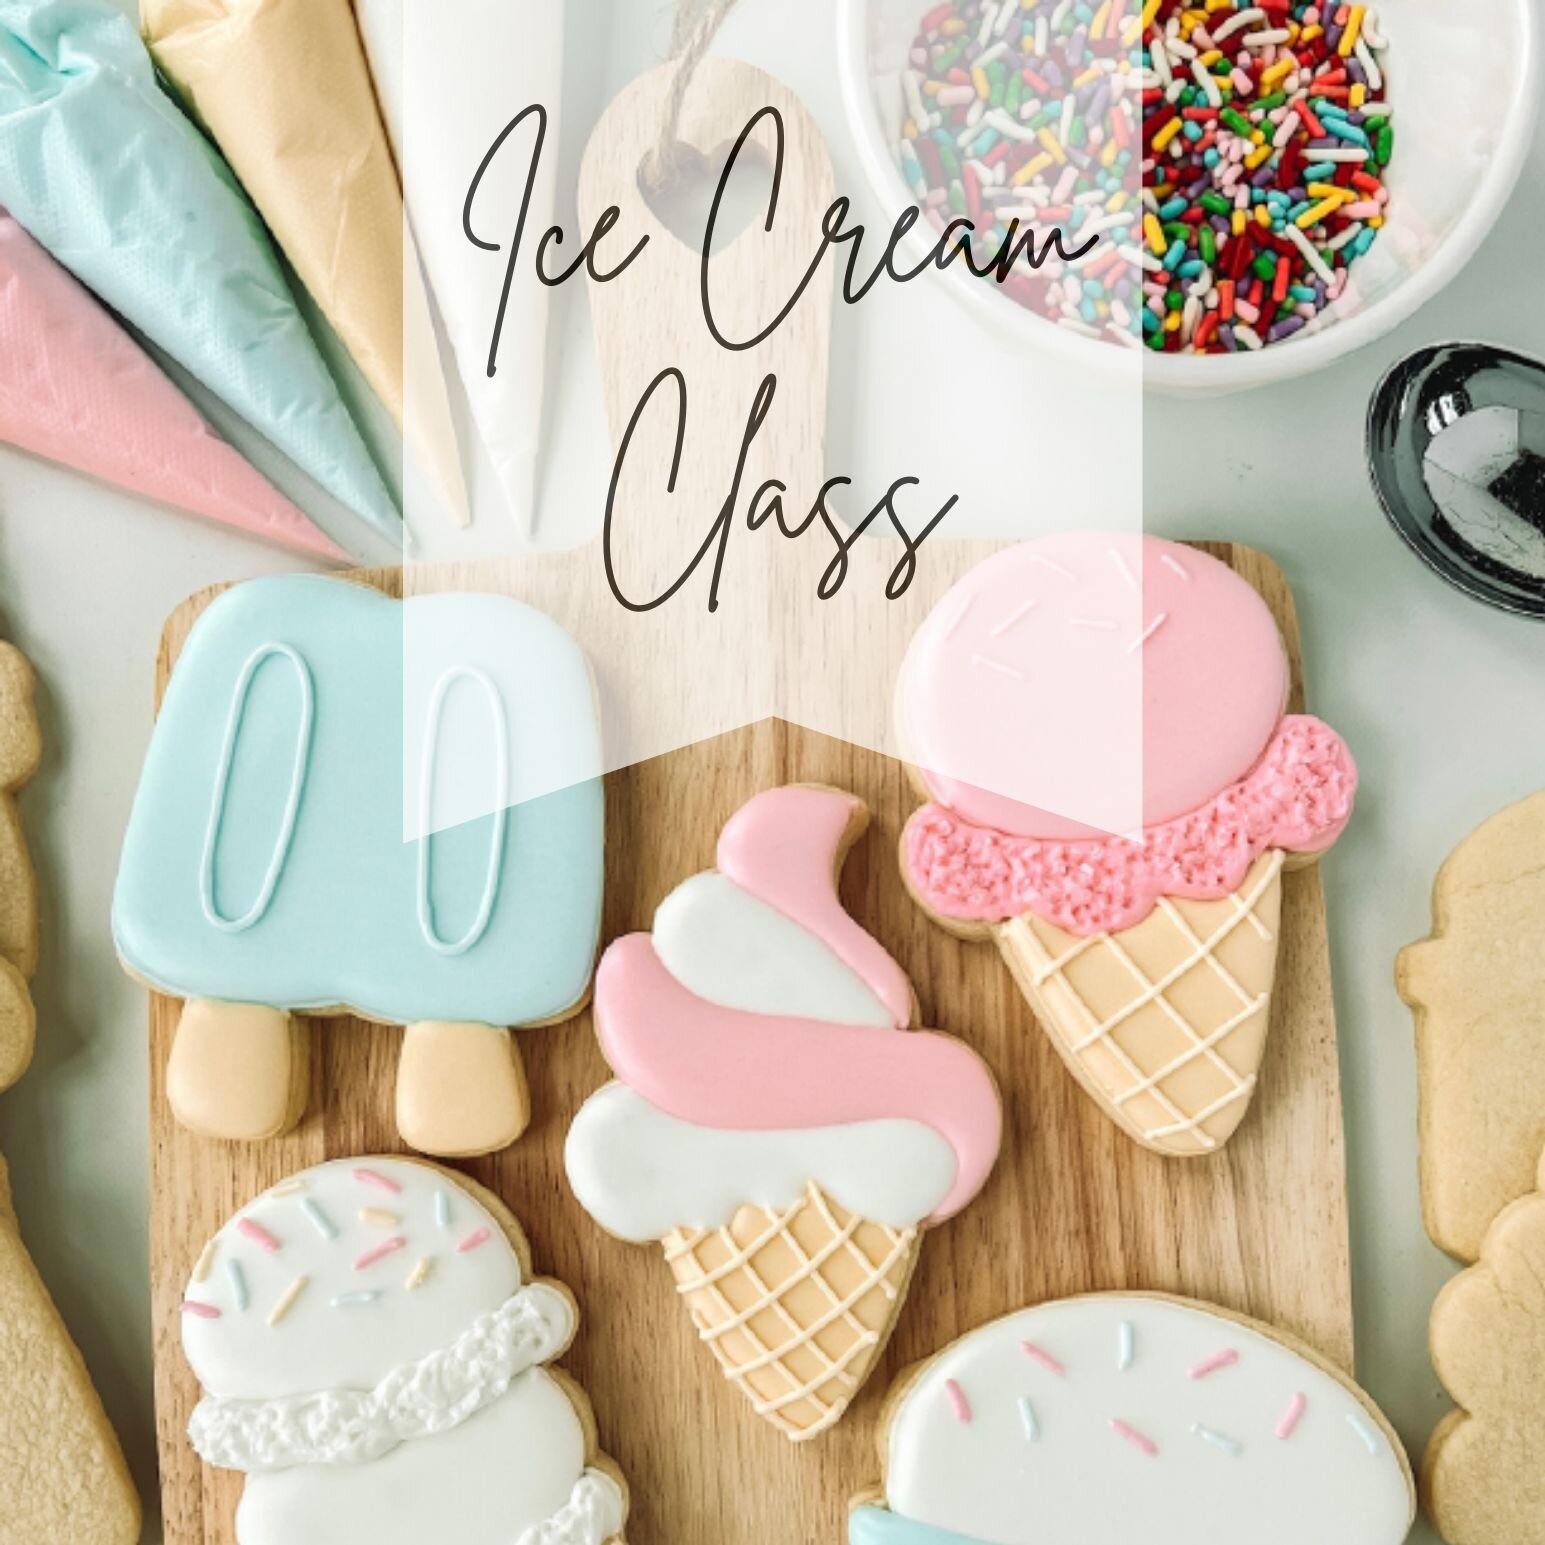 🎨🍪 Calling all aspiring cookie artists! 🍪🎨

Are you looking to unleash your creativity and delve into the world of sugar cookie decorating? Look no further because I'm thrilled to announce that I am now offering at-home sugar cookie decorating cl